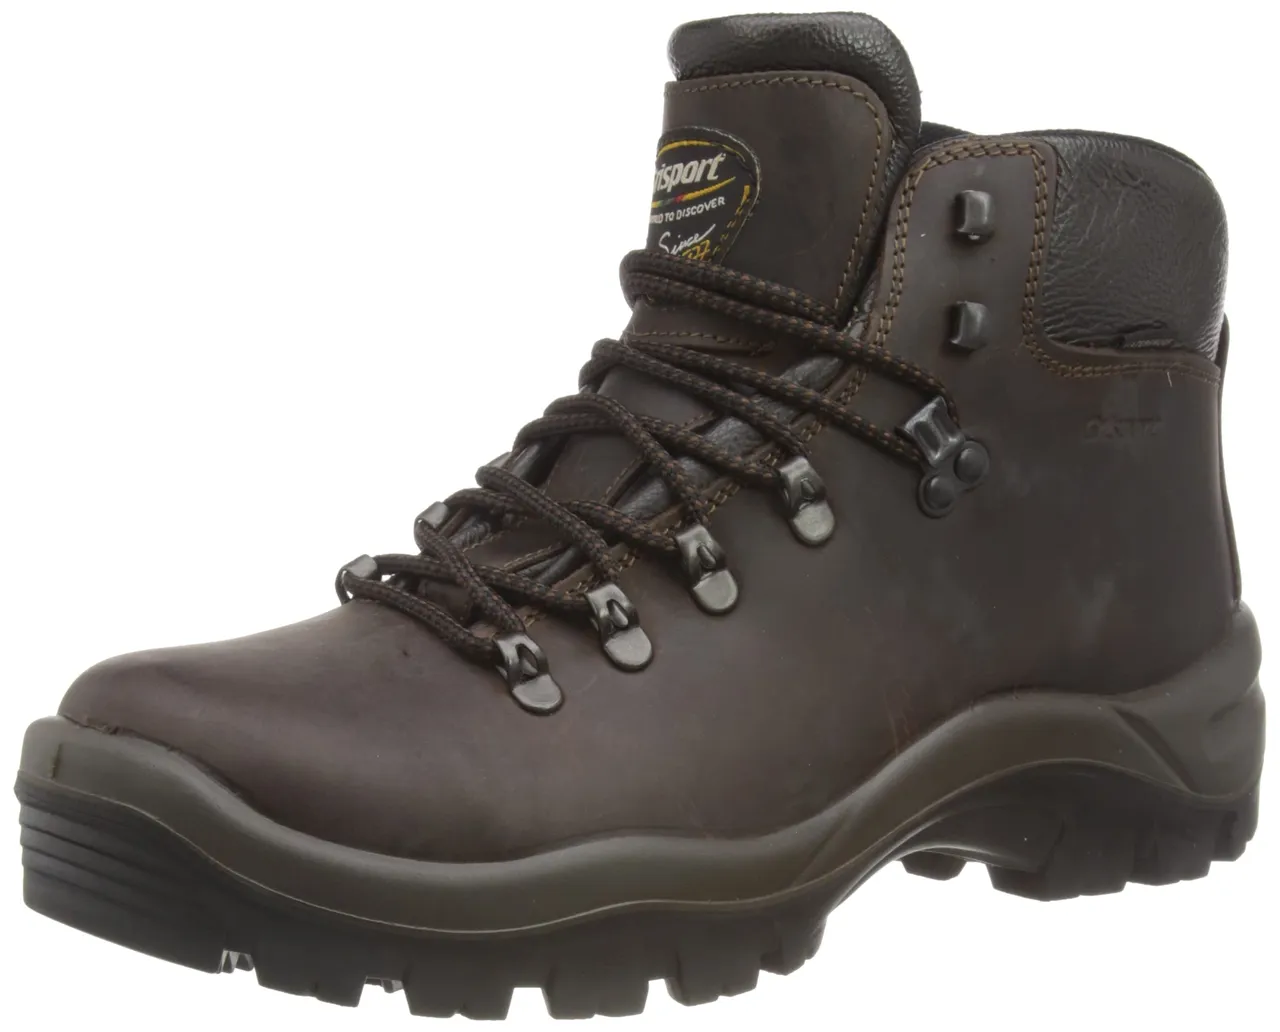 Grisport CMG622, Unisex Adults' Hiking Boot Hiking Boot,